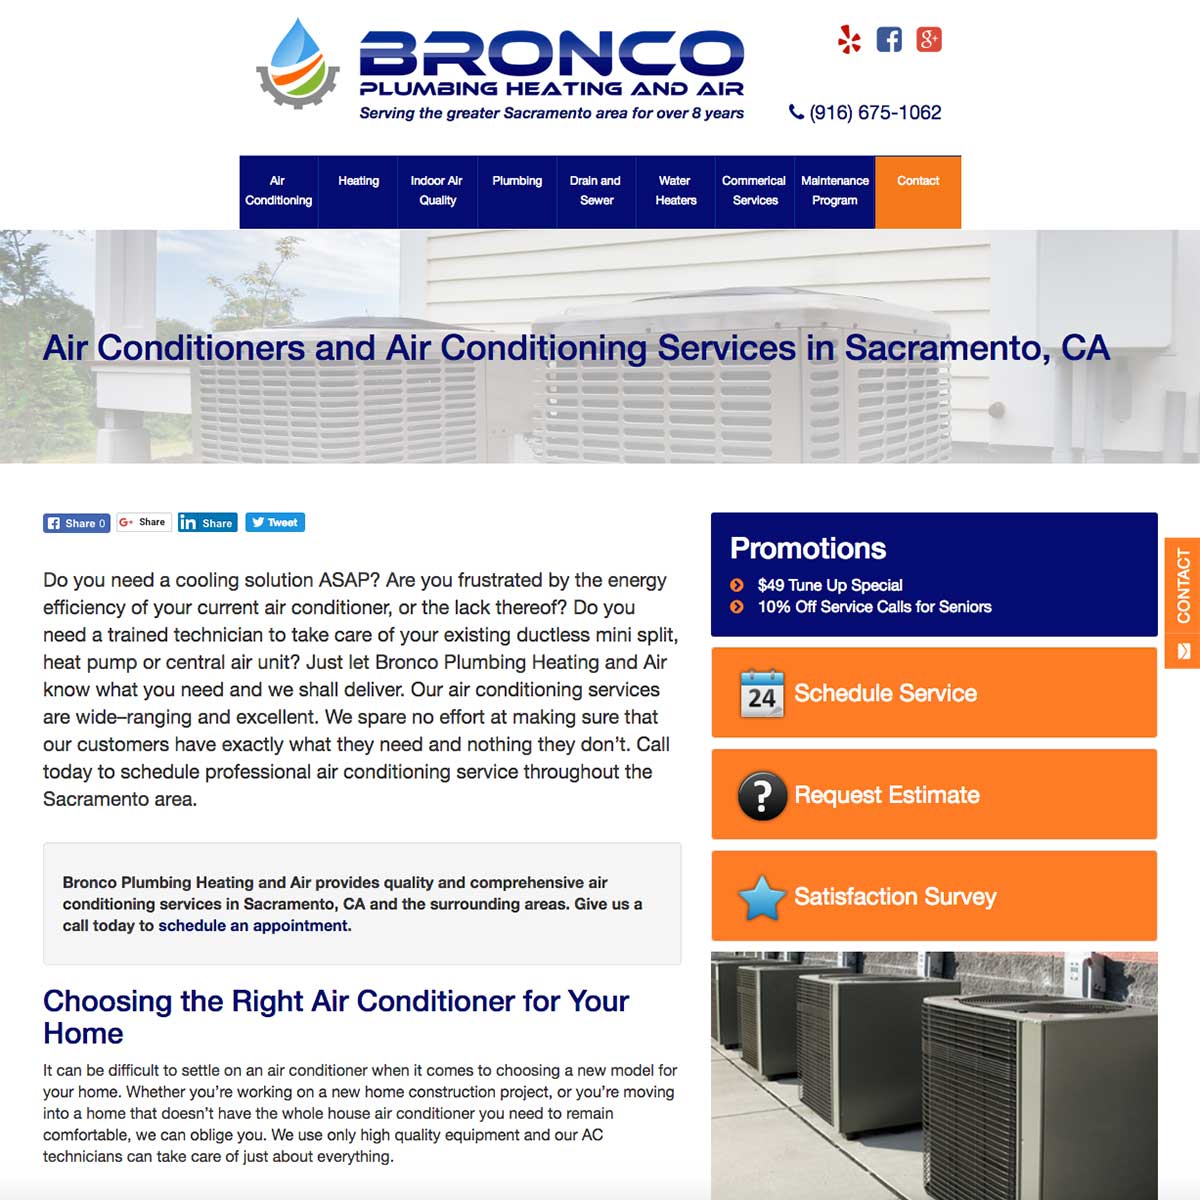 Screenshot of Bronco Plumbing Heating and Air inner page redesign